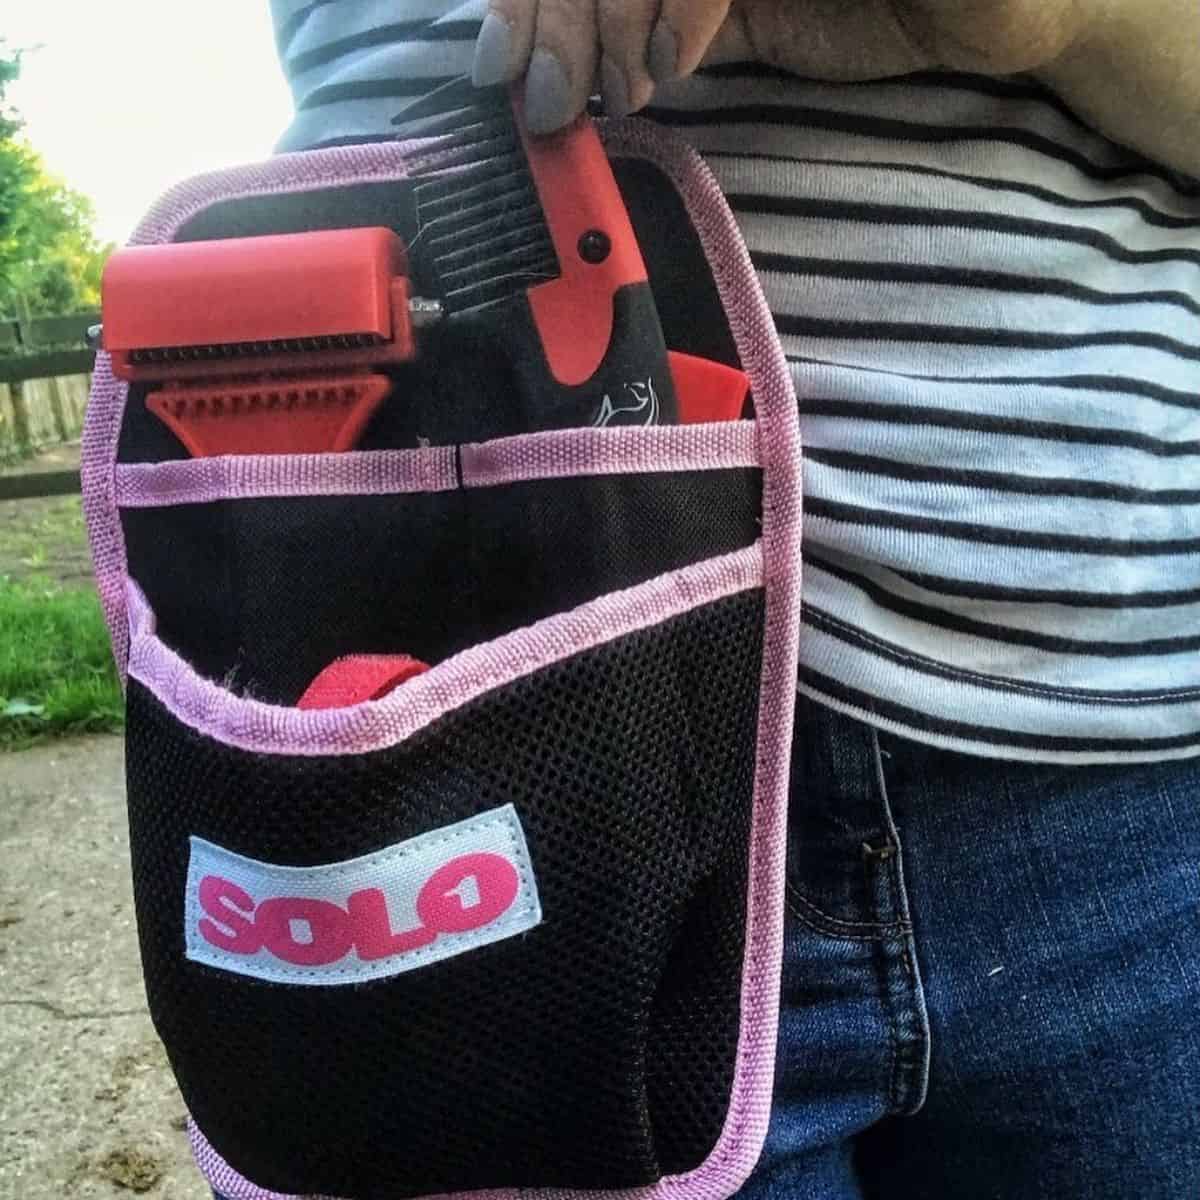 A horse comb and a brush hanging on an owner‘s waist.